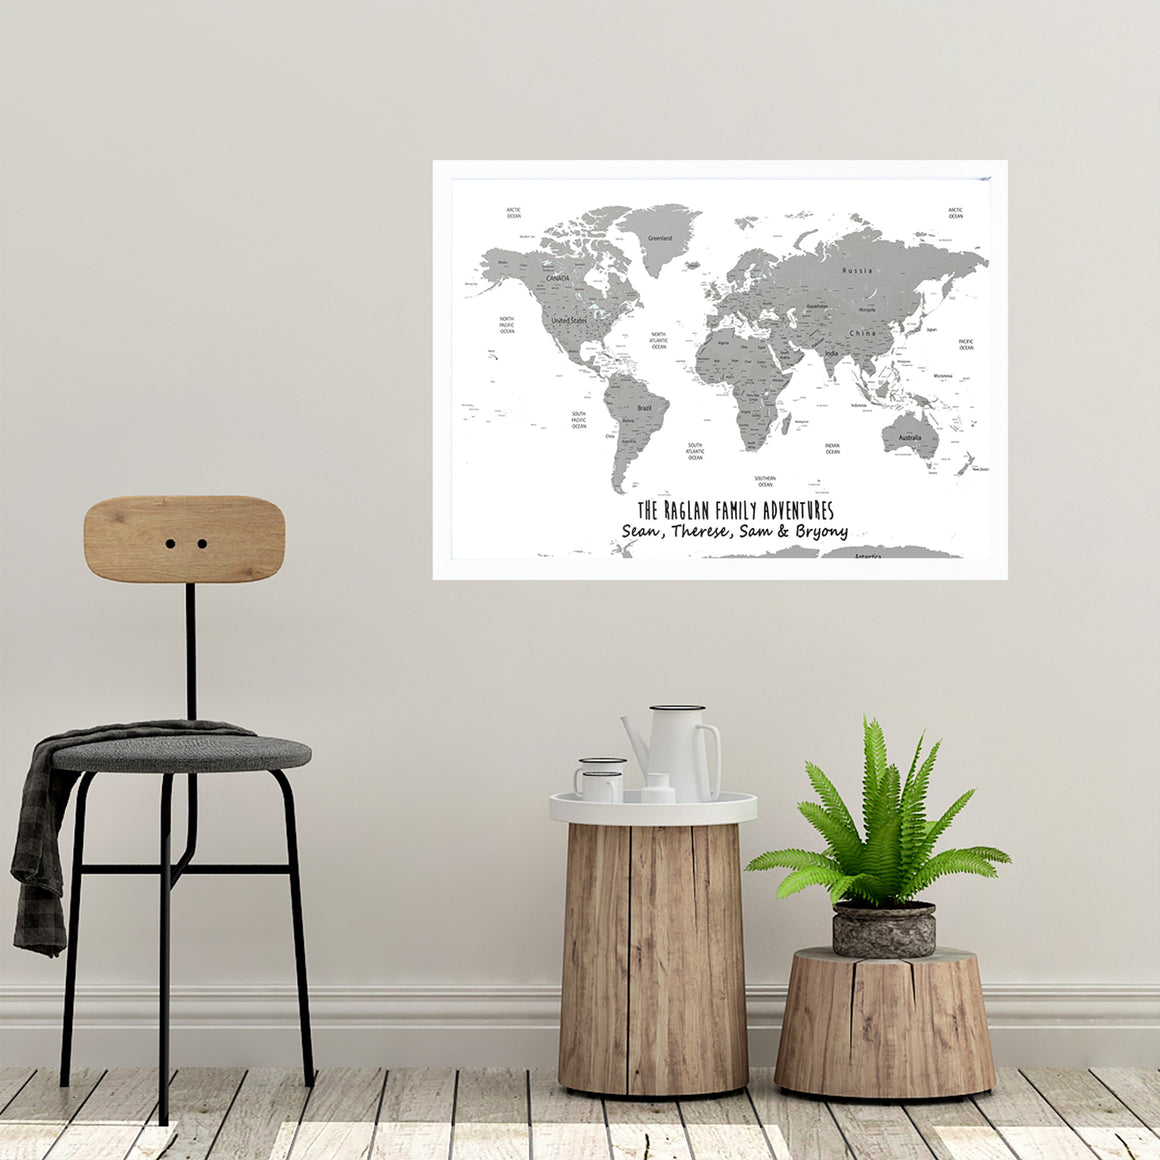 Personalised World Map Framed Pin Board in White & Grey is a perfect addition to any home. Personalise this Map with an inspirational quote or family names, and track past and future travels by placing pins on the destinations of choice.